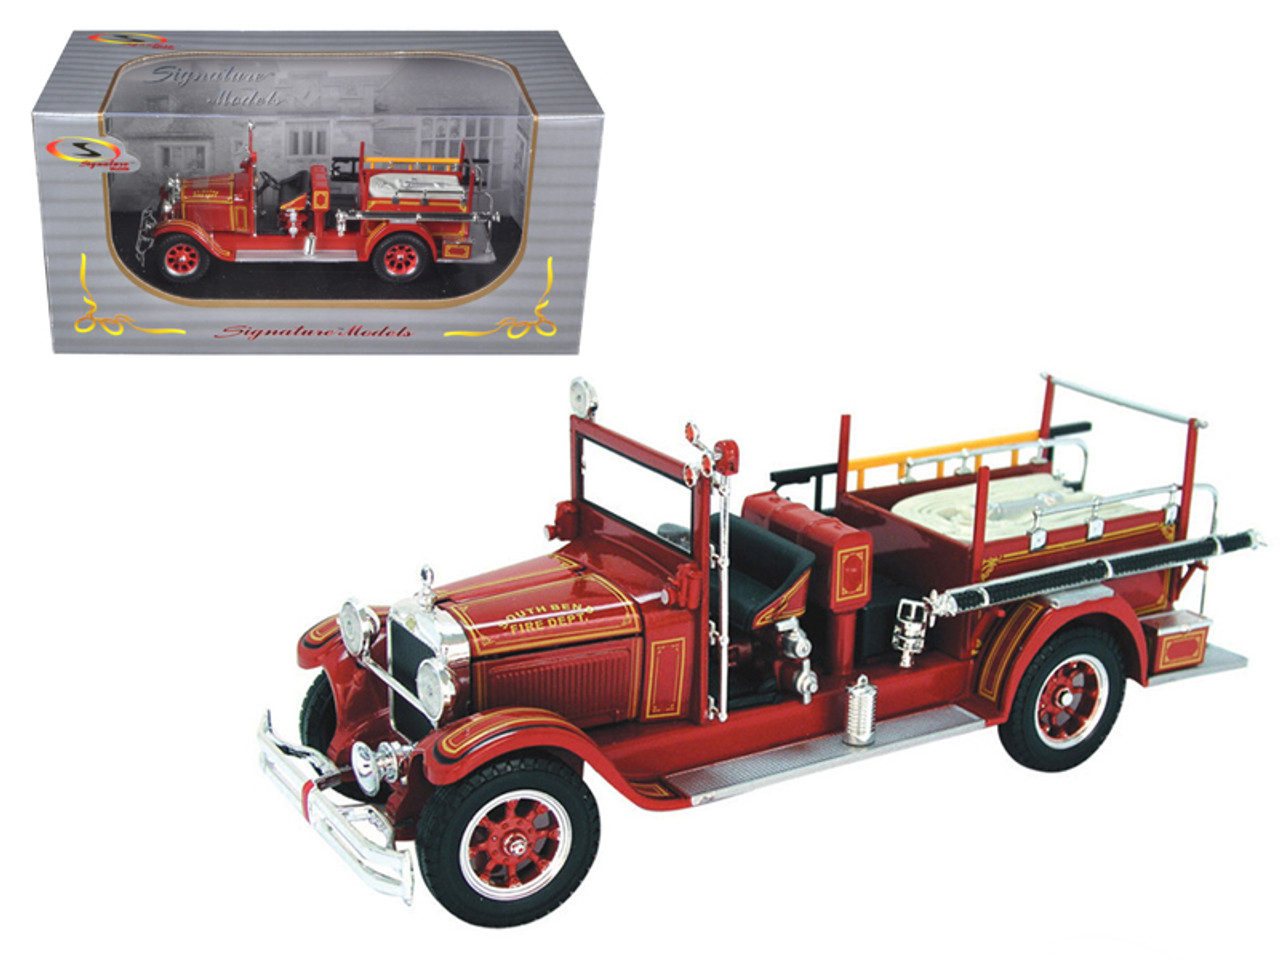 1928 Studebaker Fire Engine 1/32 Diecast Model Car by Signature Models